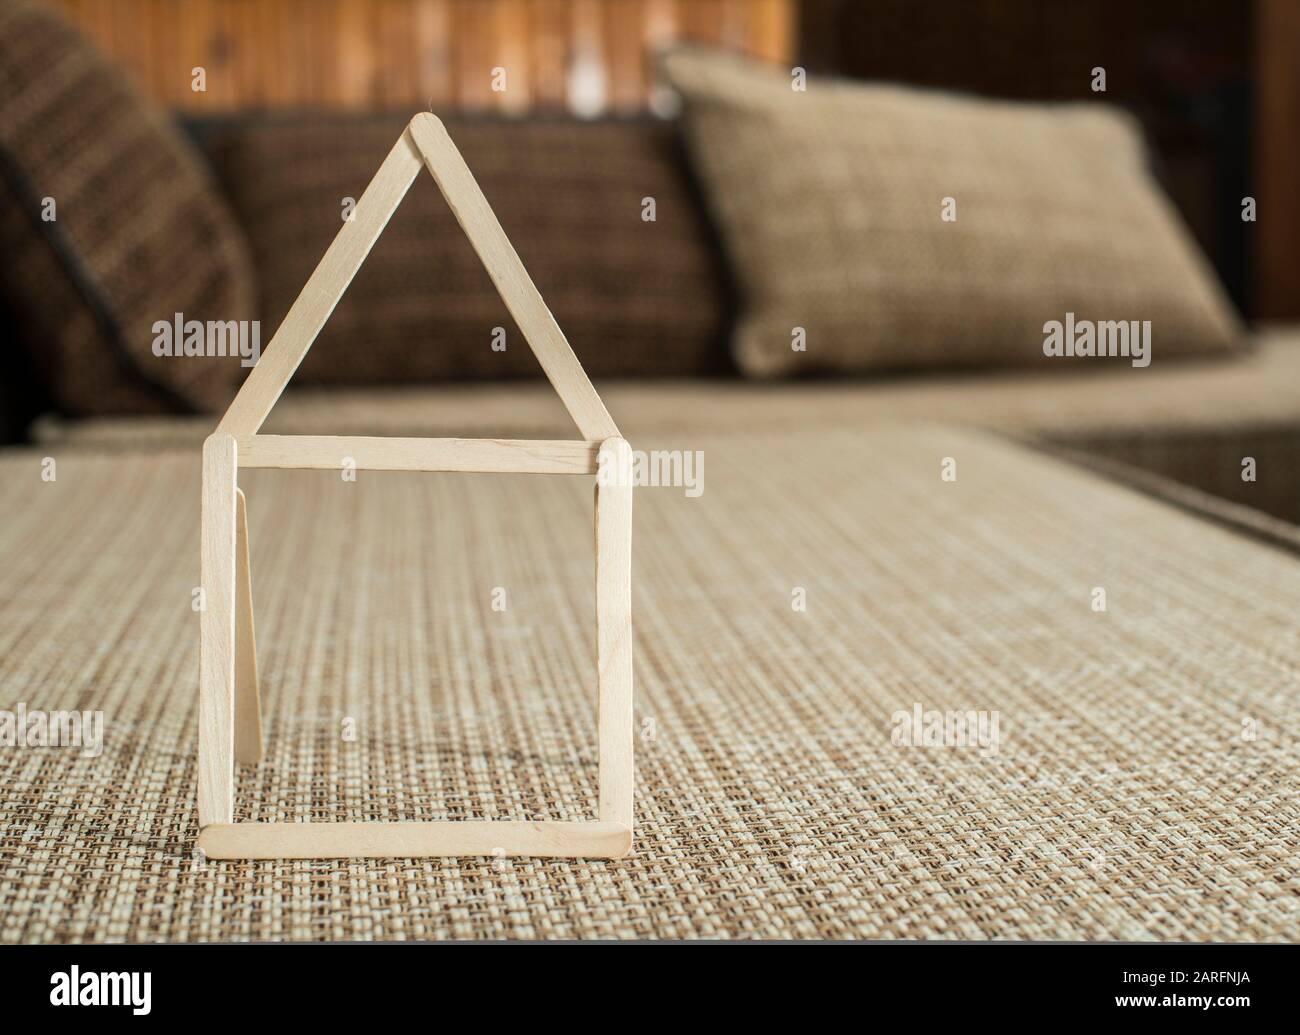 Model house made of wooden sticks placed in room interior Stock Photo -  Alamy